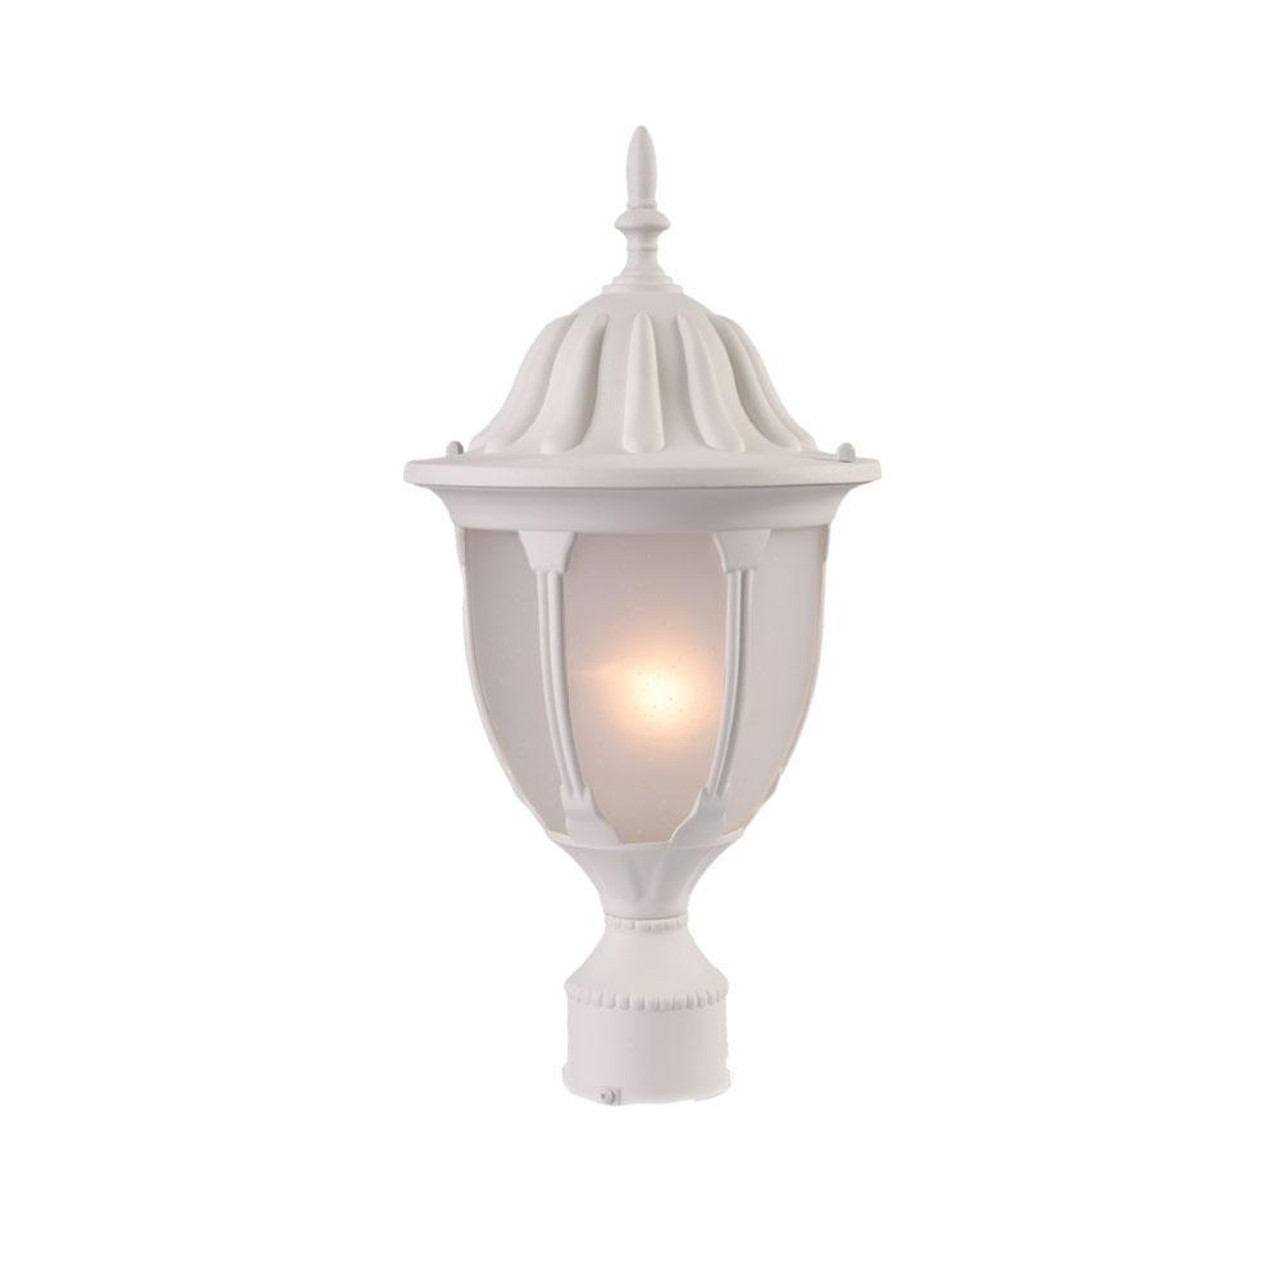 Suffolk Collection Post-Mount 1-Light Outdoor Textured White Light Fixture, Acclaim  Lighting 5067TW/FR 24RHQ Acclaim Lighting Post Mount Light